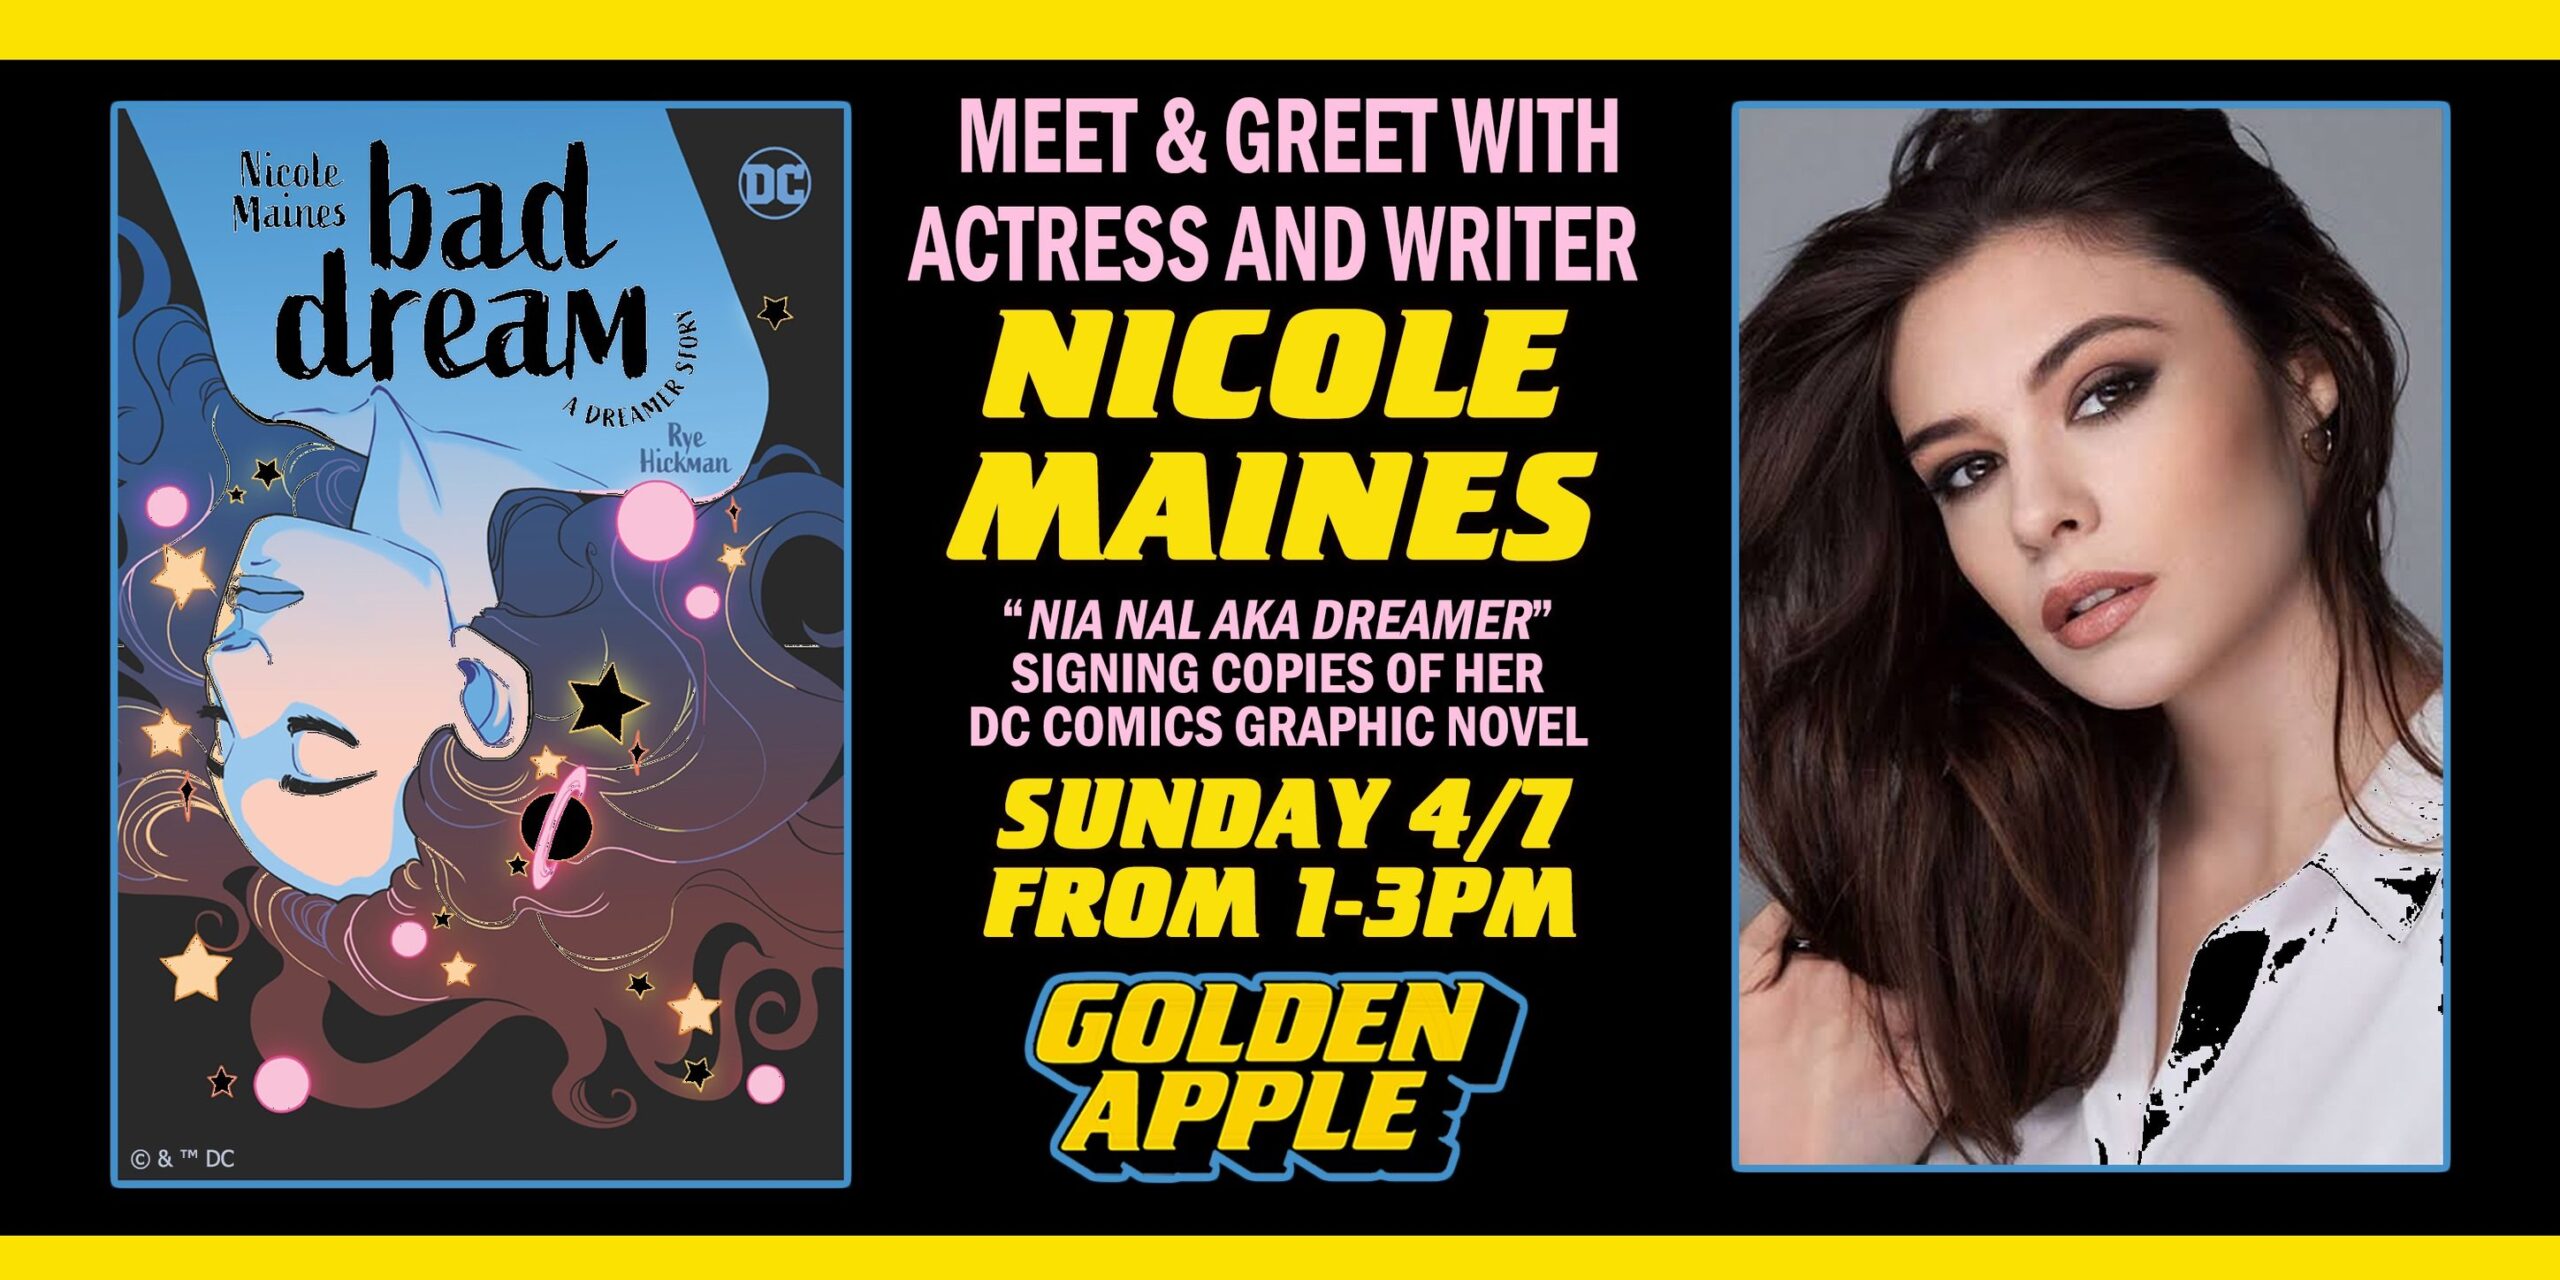 Promotional banner for a meet and greet with actress and writer nicole maines, featuring her dc comics graphic novel "bad dream" and event details.